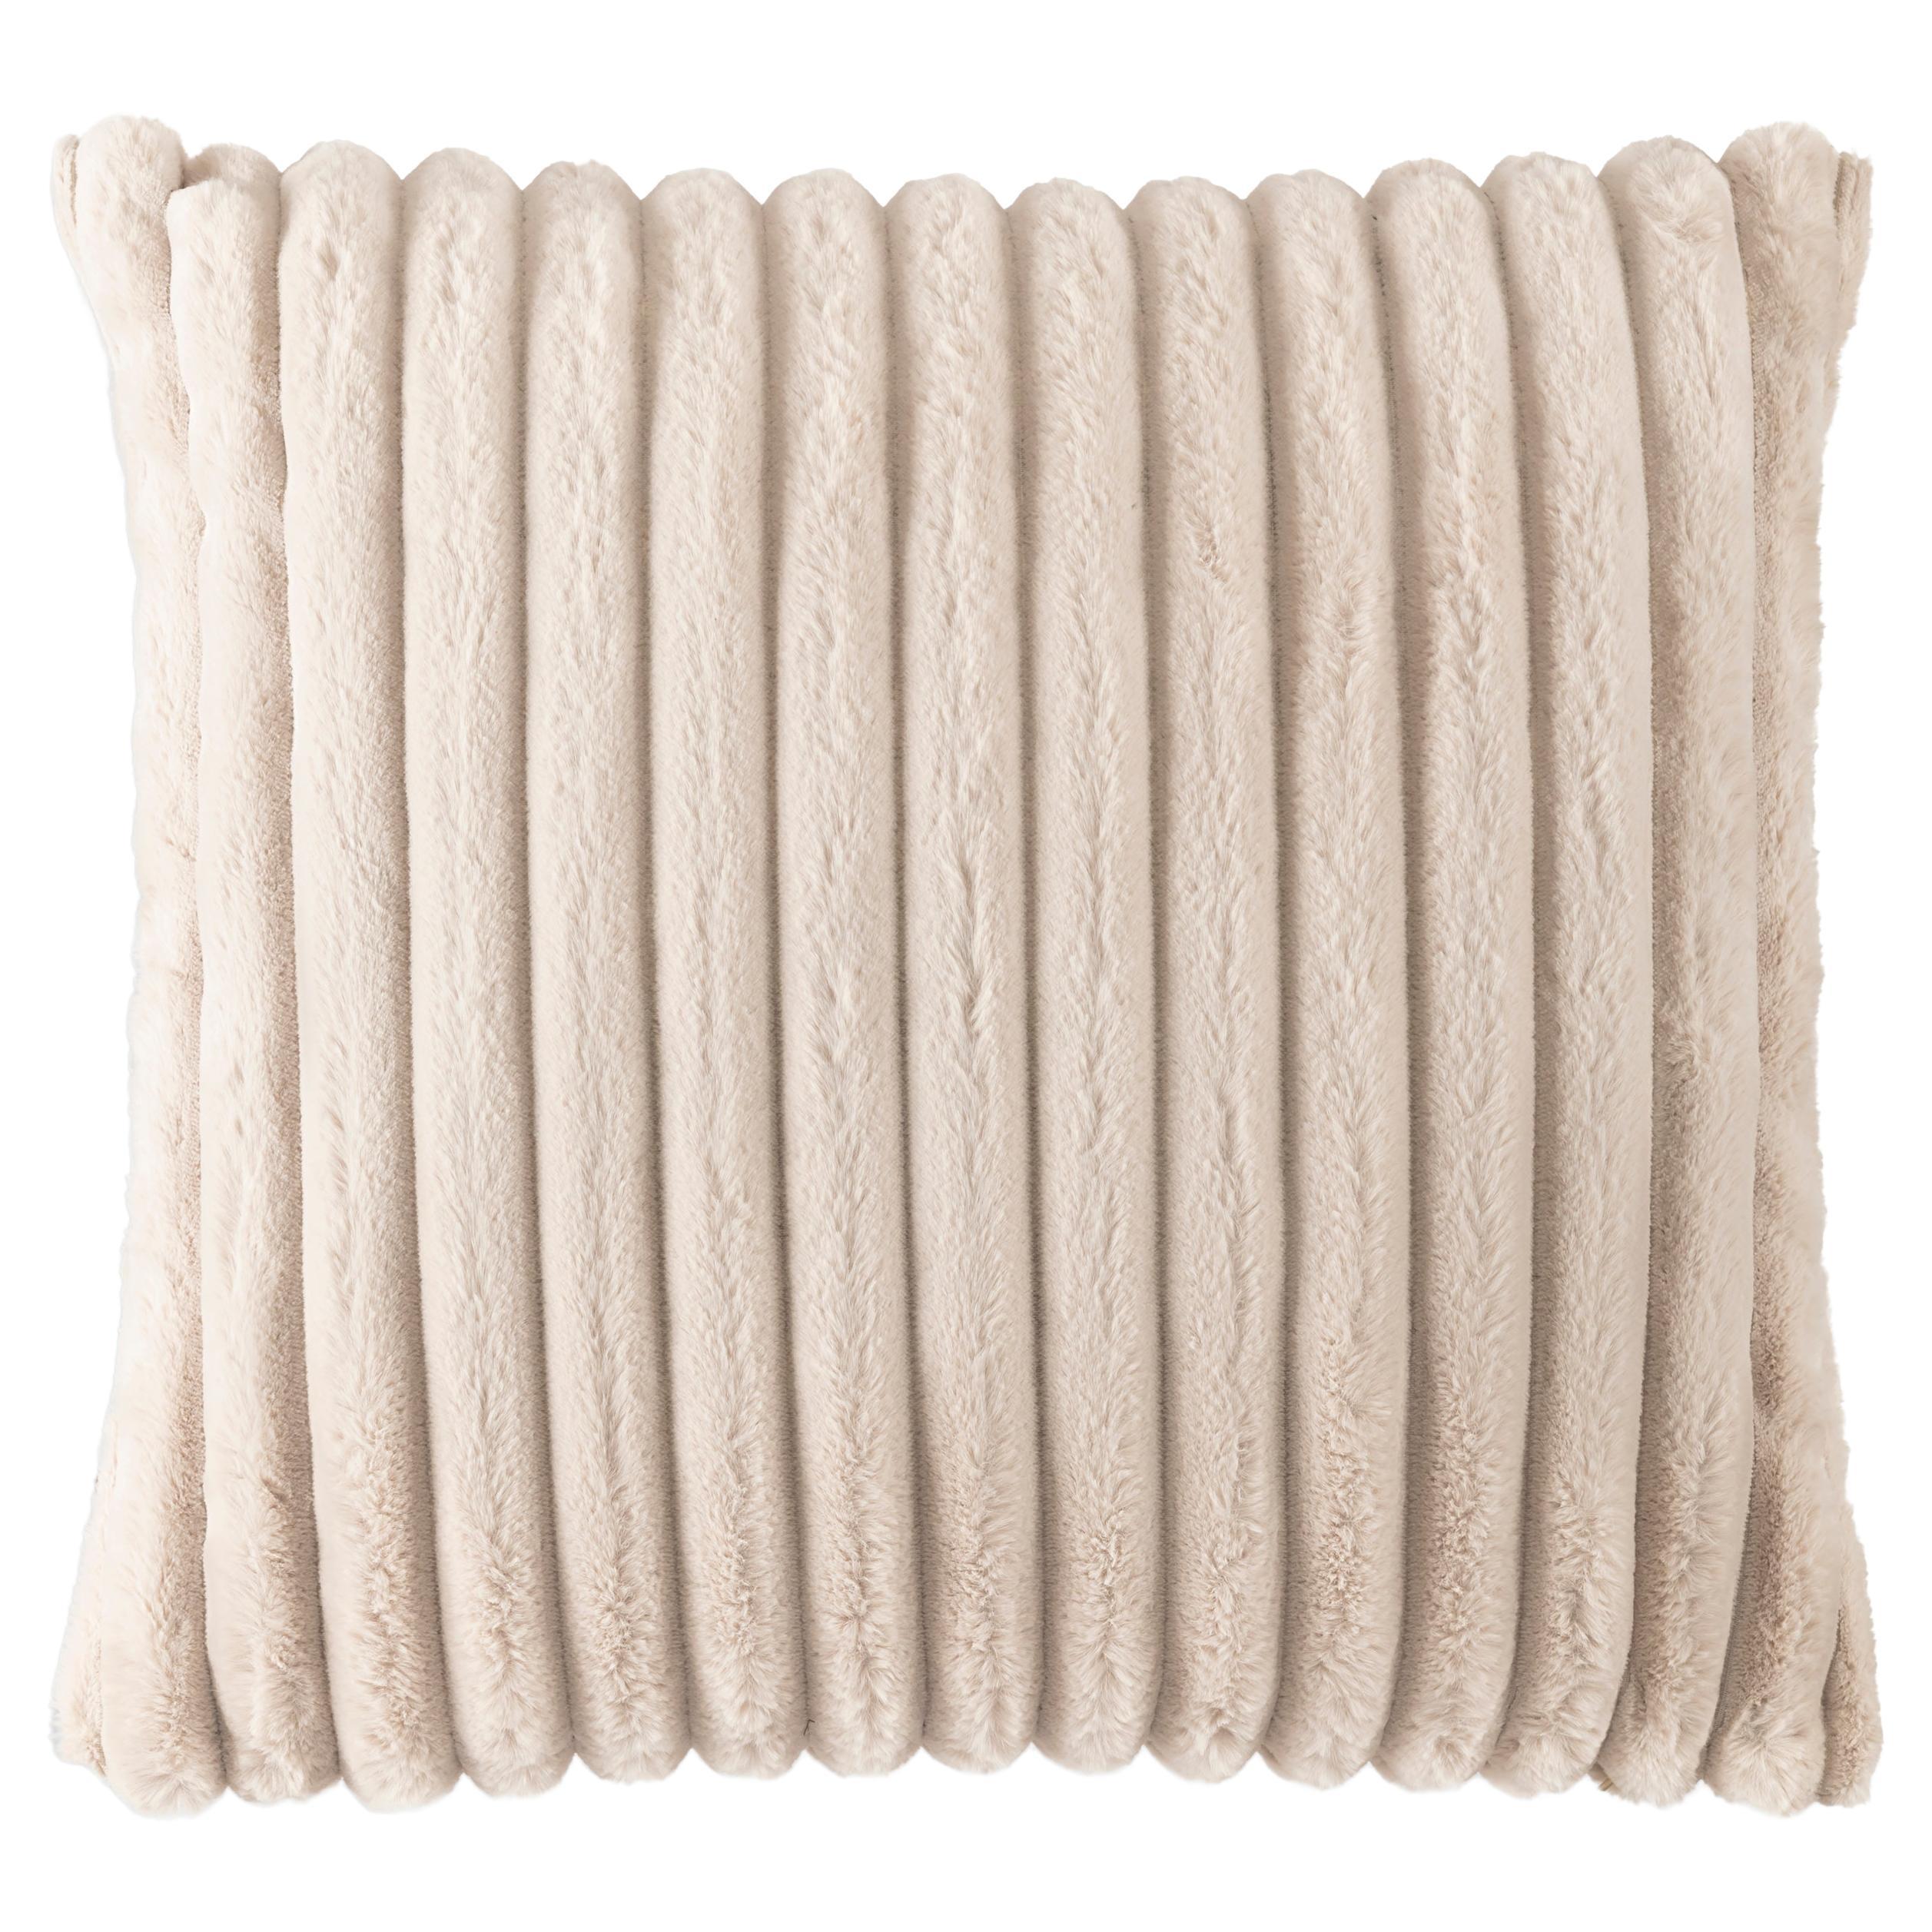 Lux Kuxe White Fur Pillow For Sale